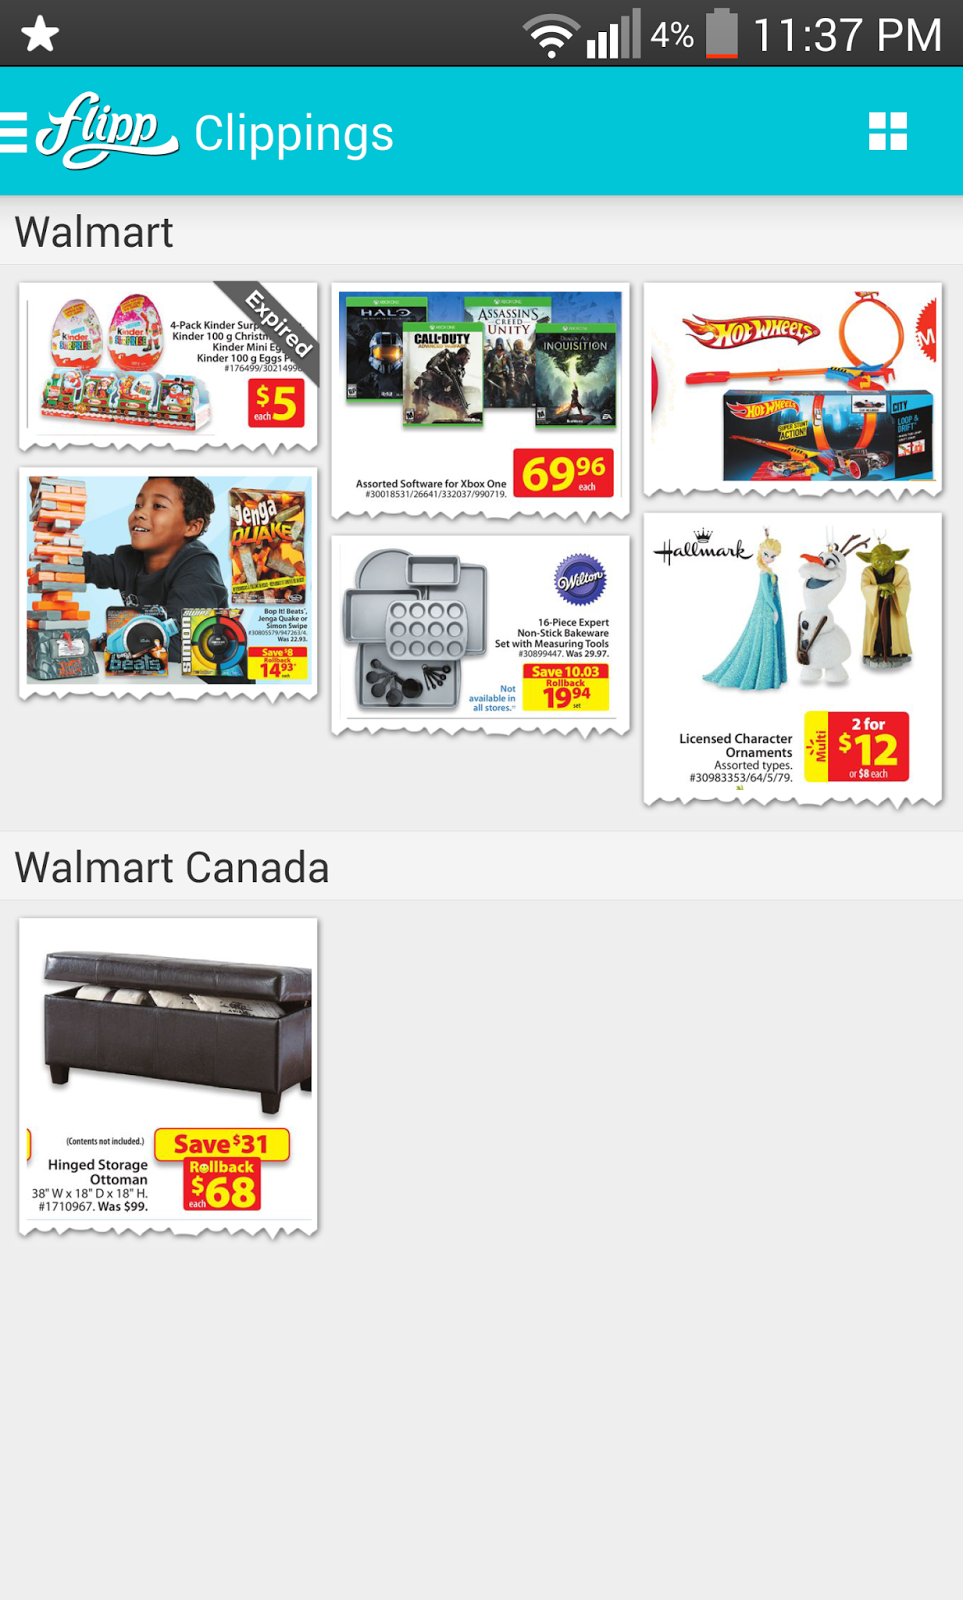 Affordable Gifts From Top Brands at Walmart #Flipp4Holidays